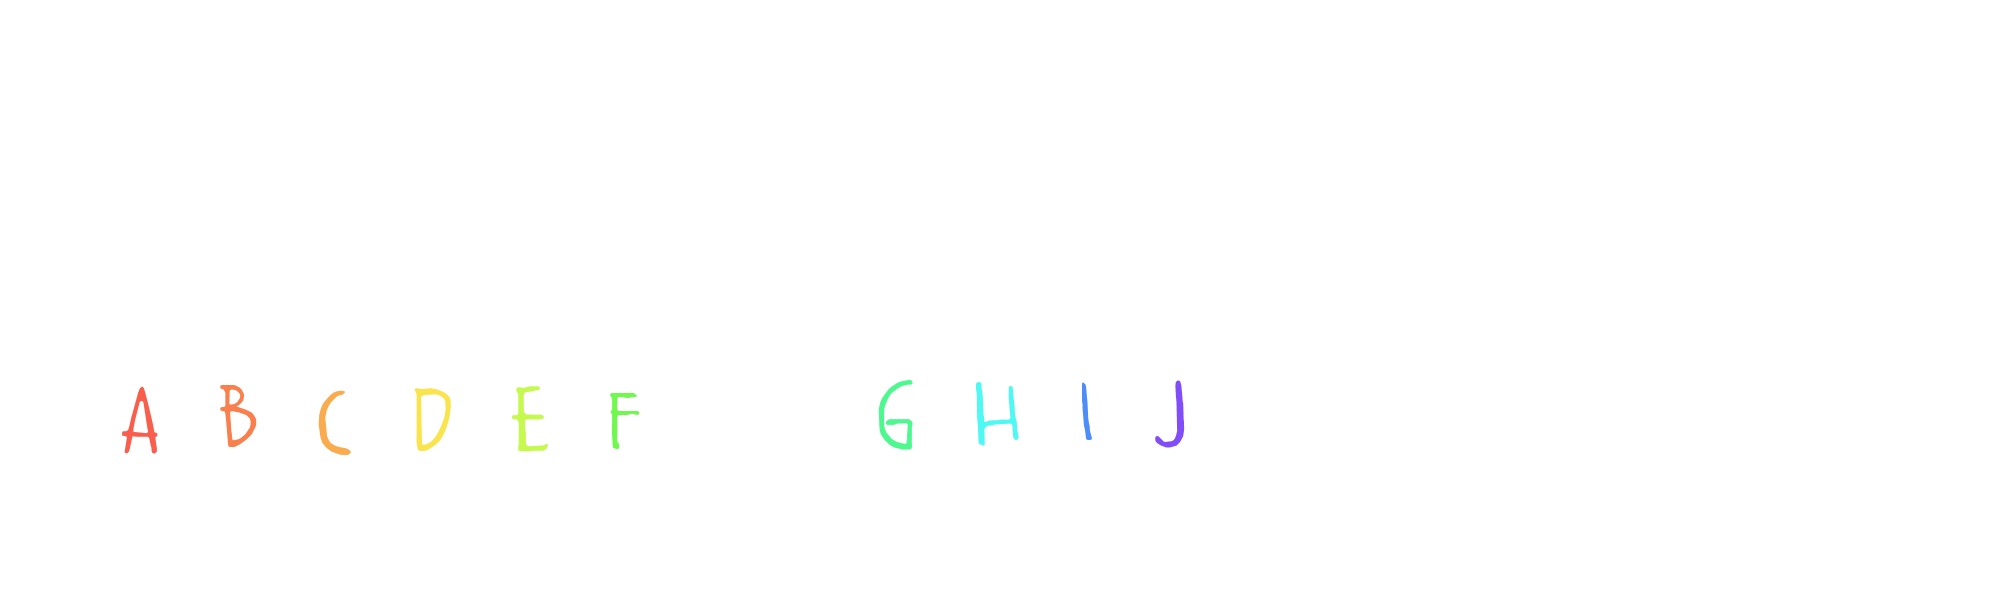 mapping_contest_concept.png